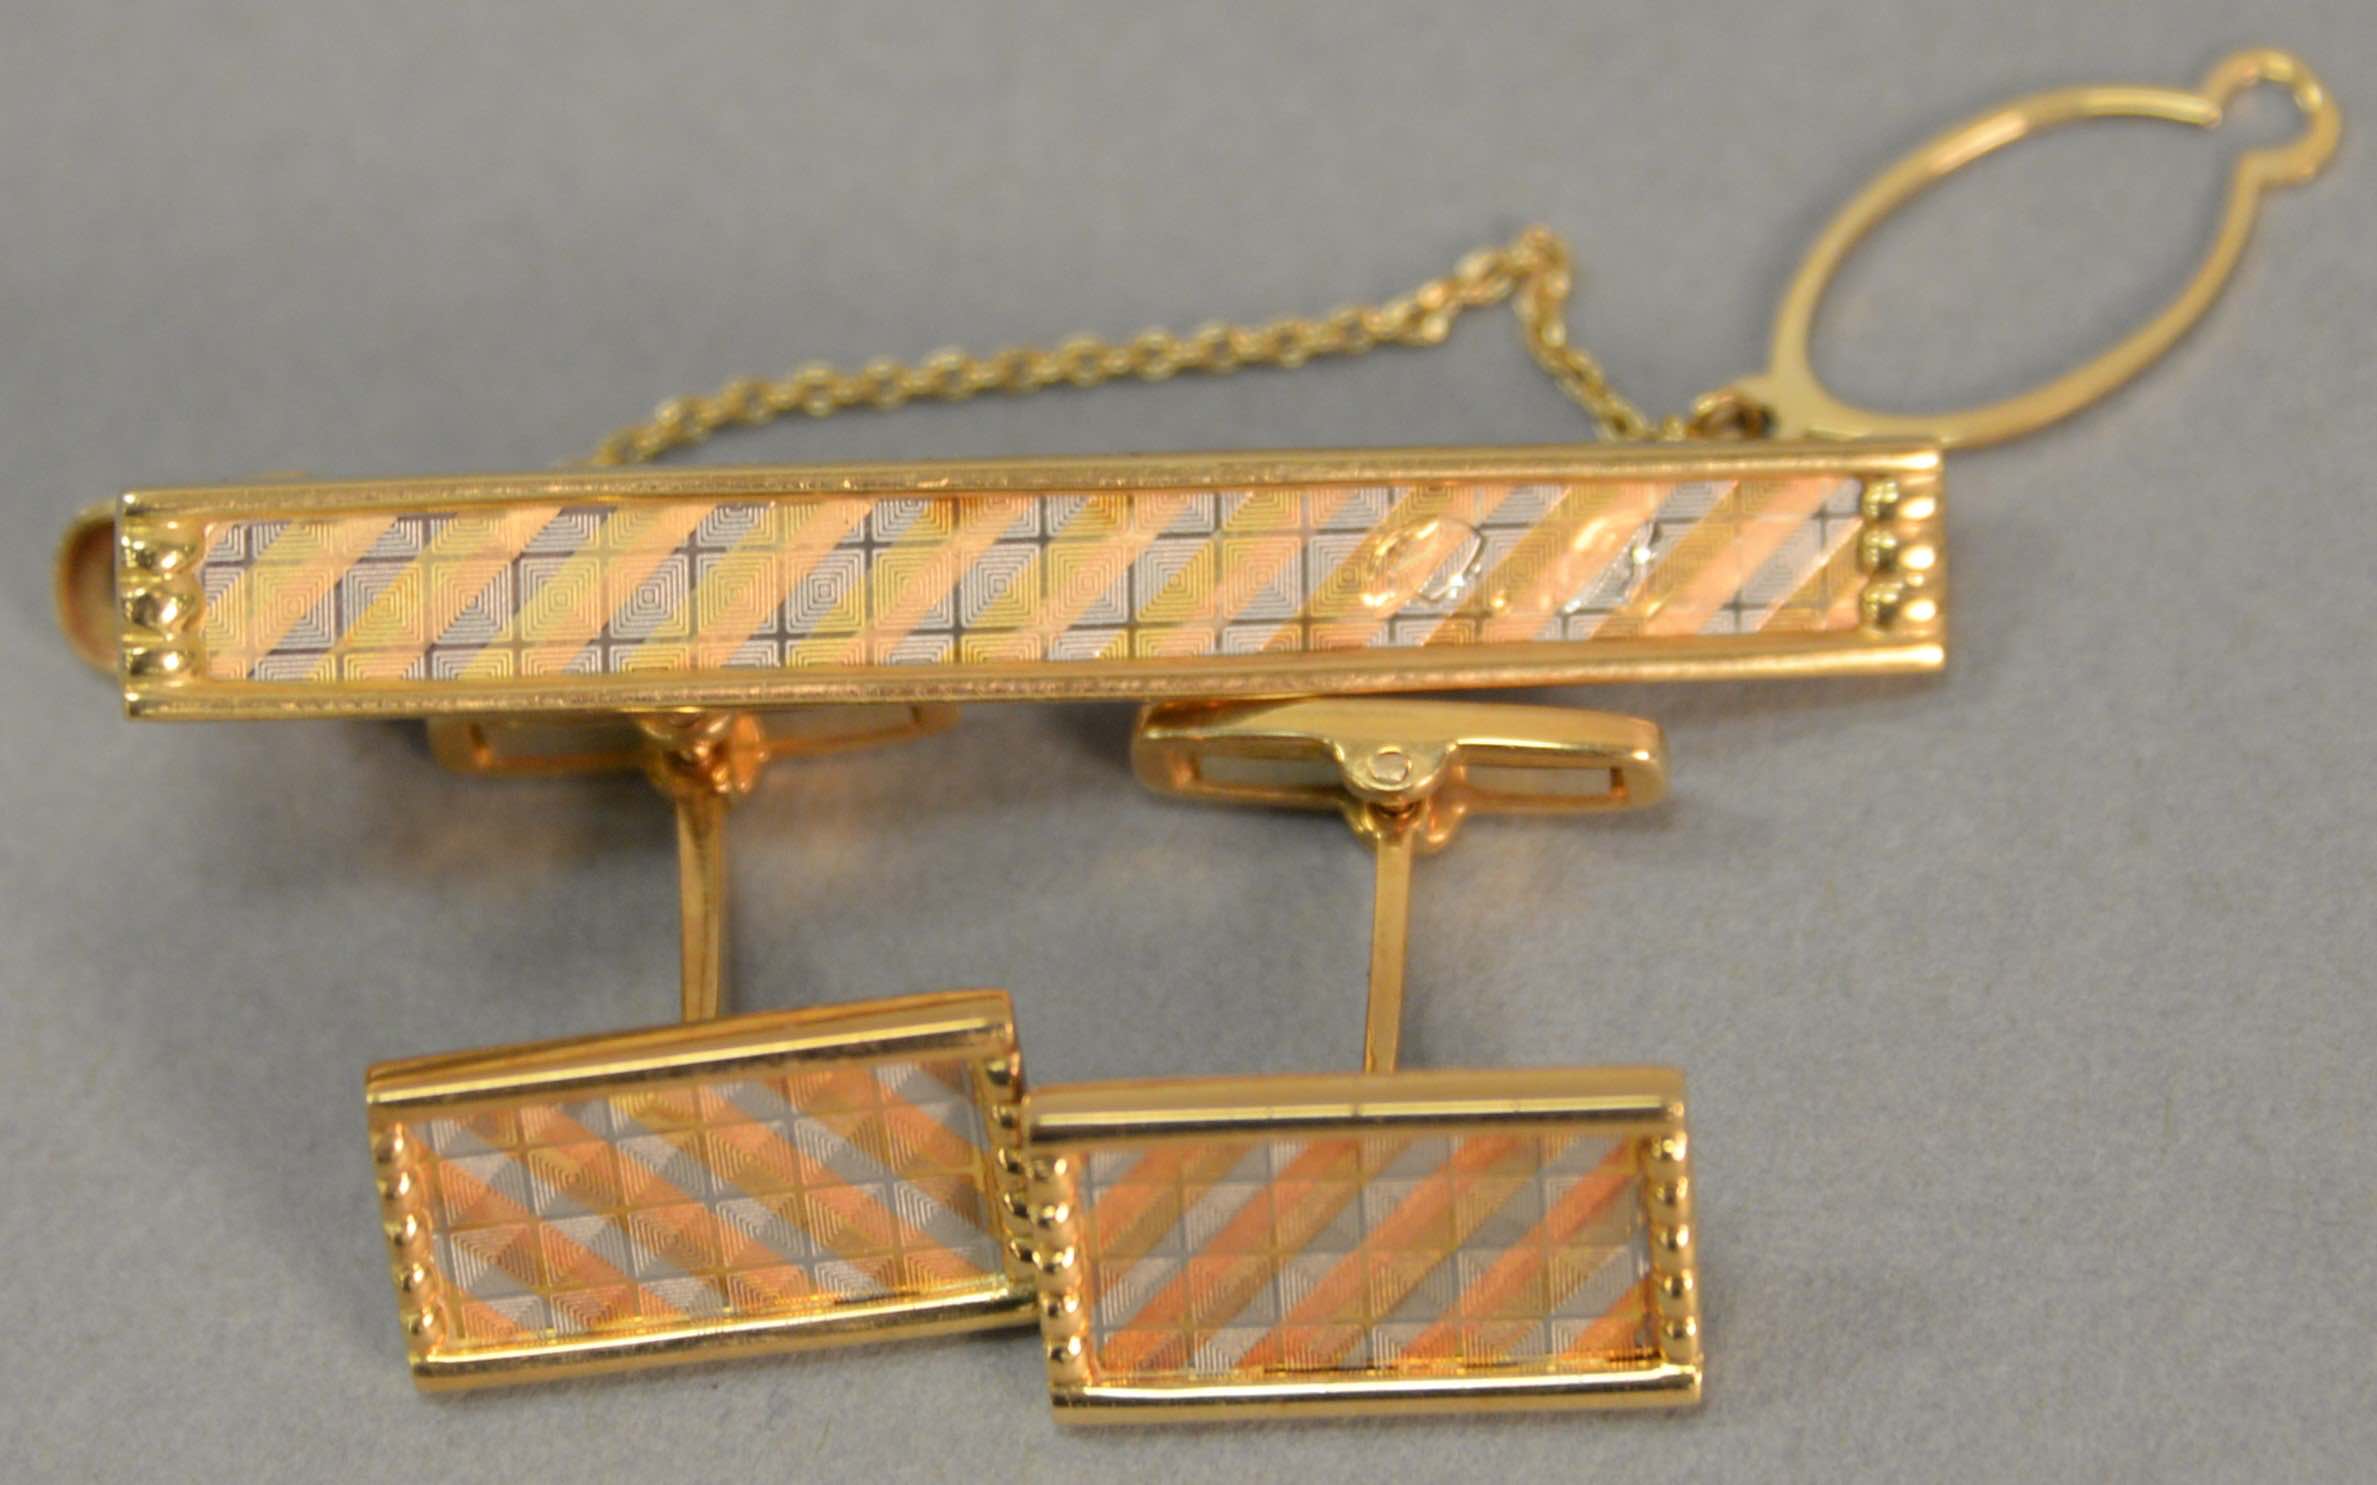 DR monogrammed Mitsubishi 18k cufflinks and tie clip set, estimated at $400-600.